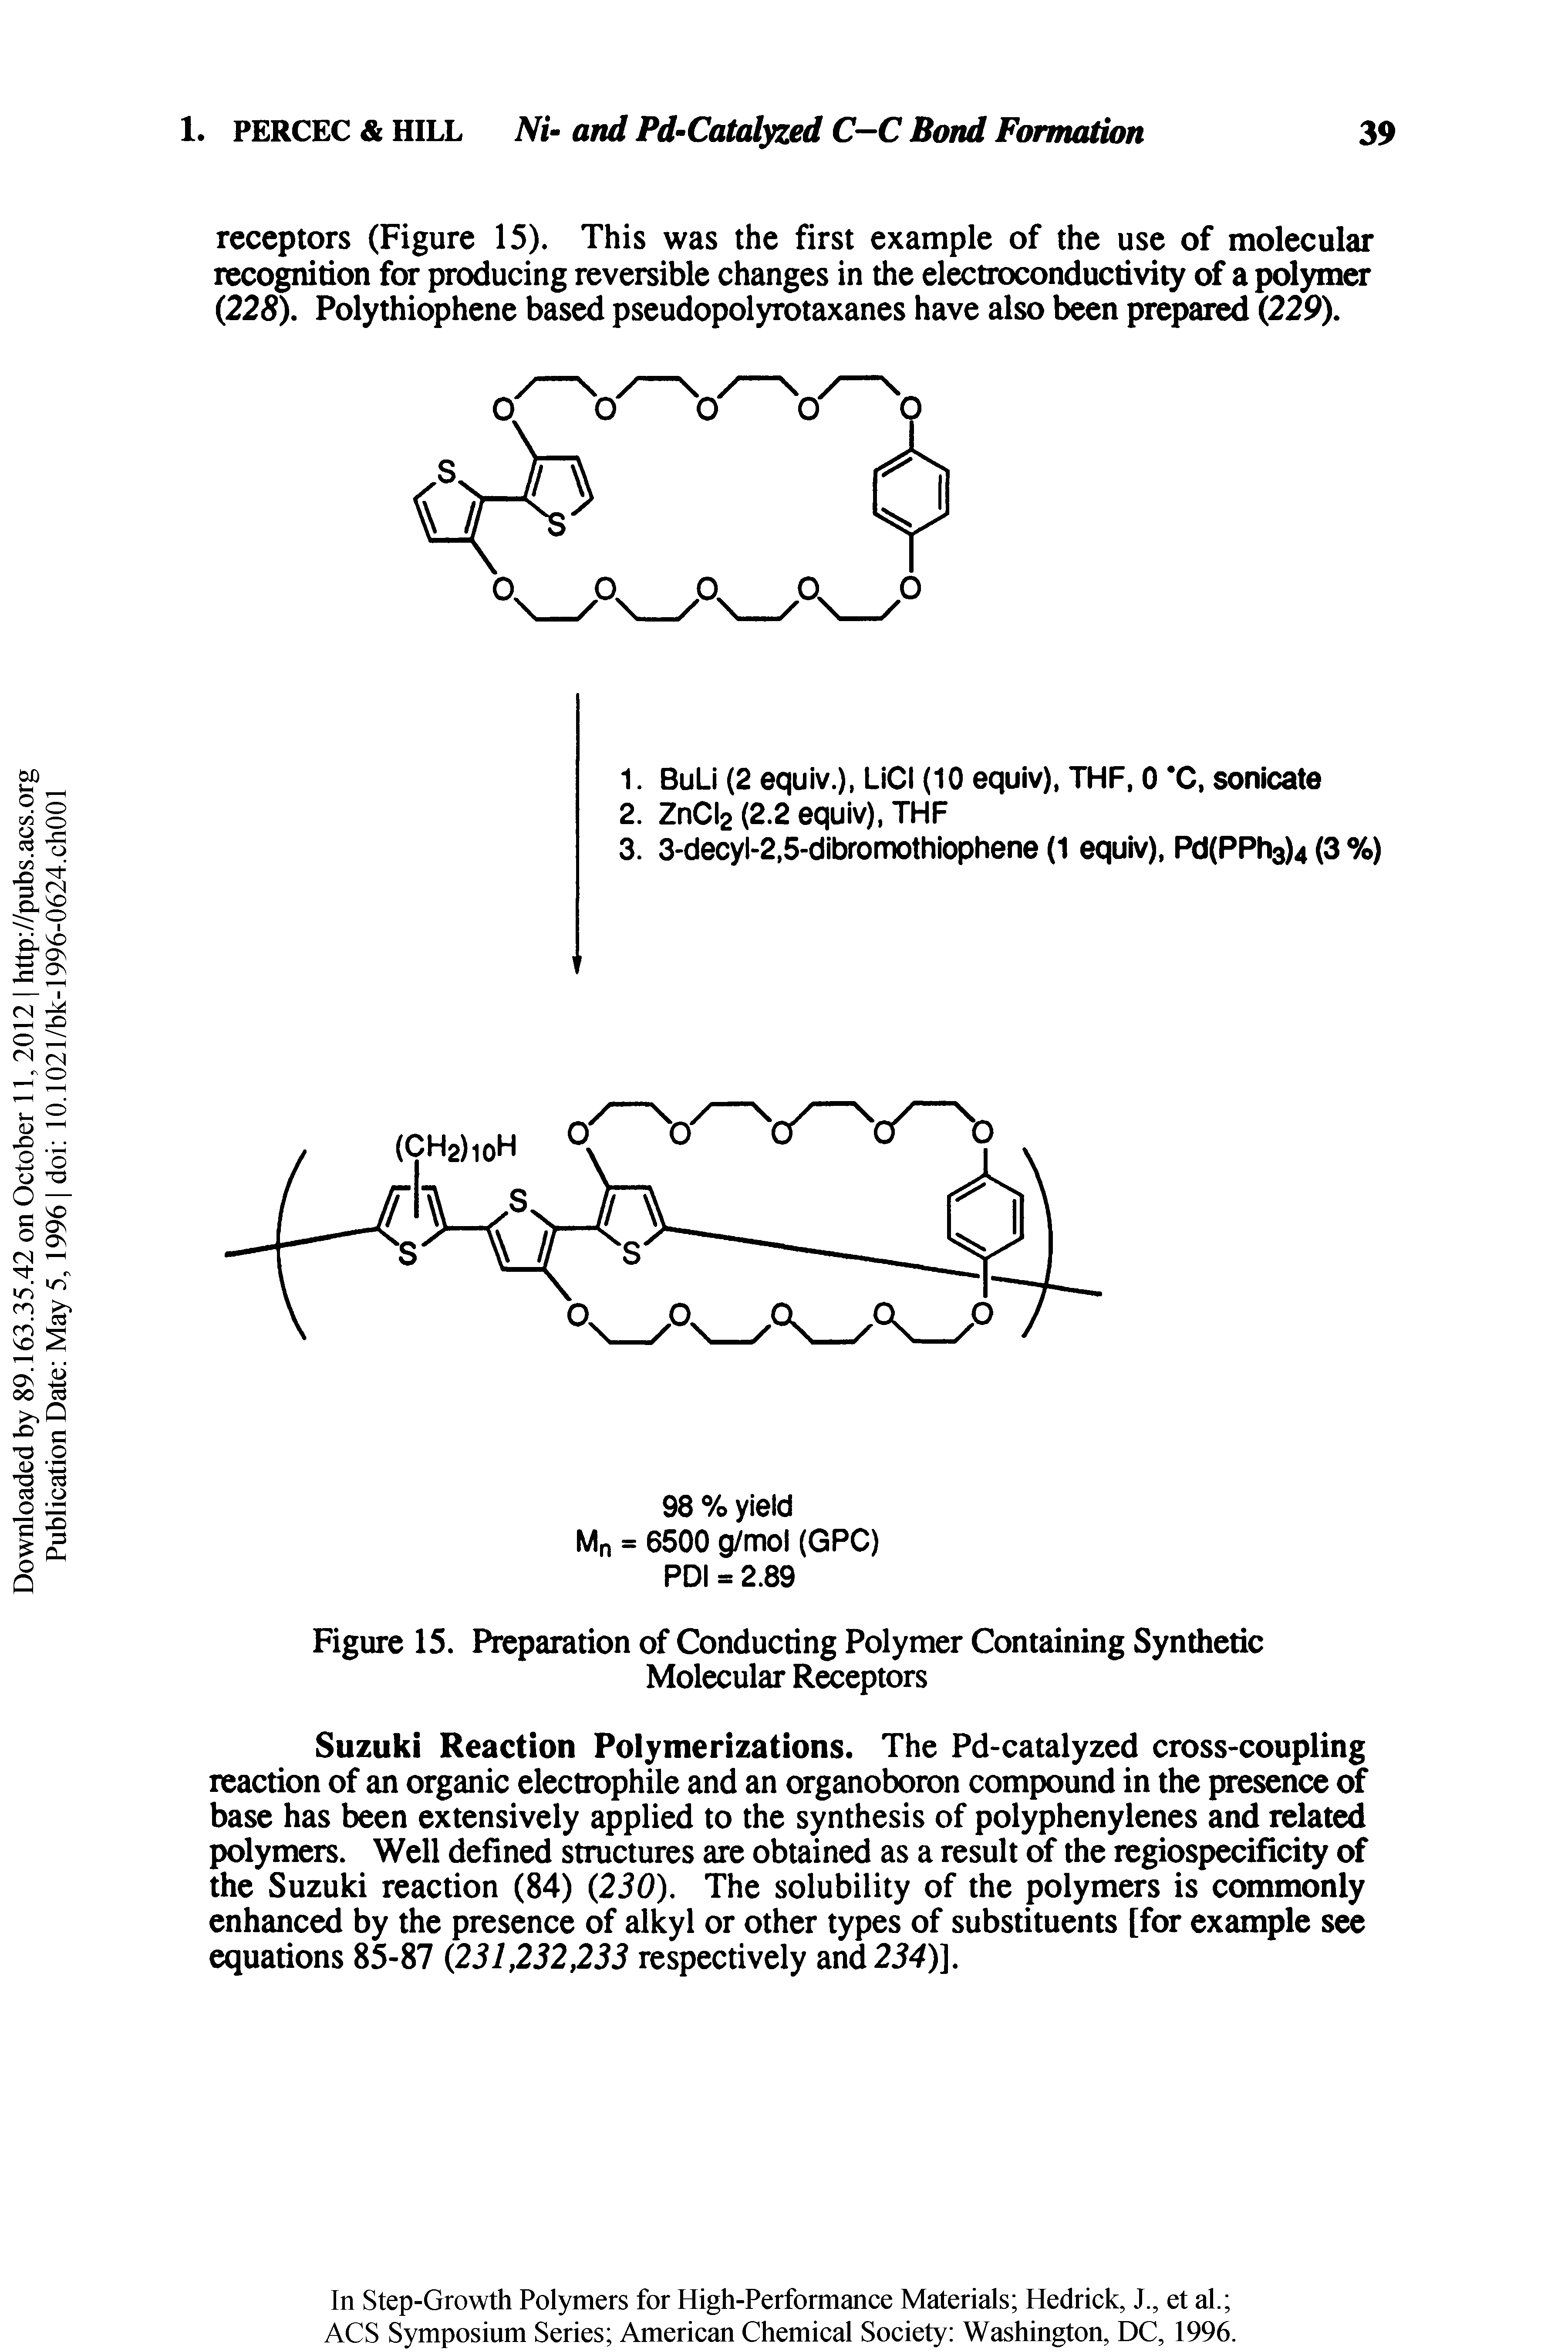 Figure 15. Preparation of Conducting Polymer Containing Synthetic Molecular Receptors...